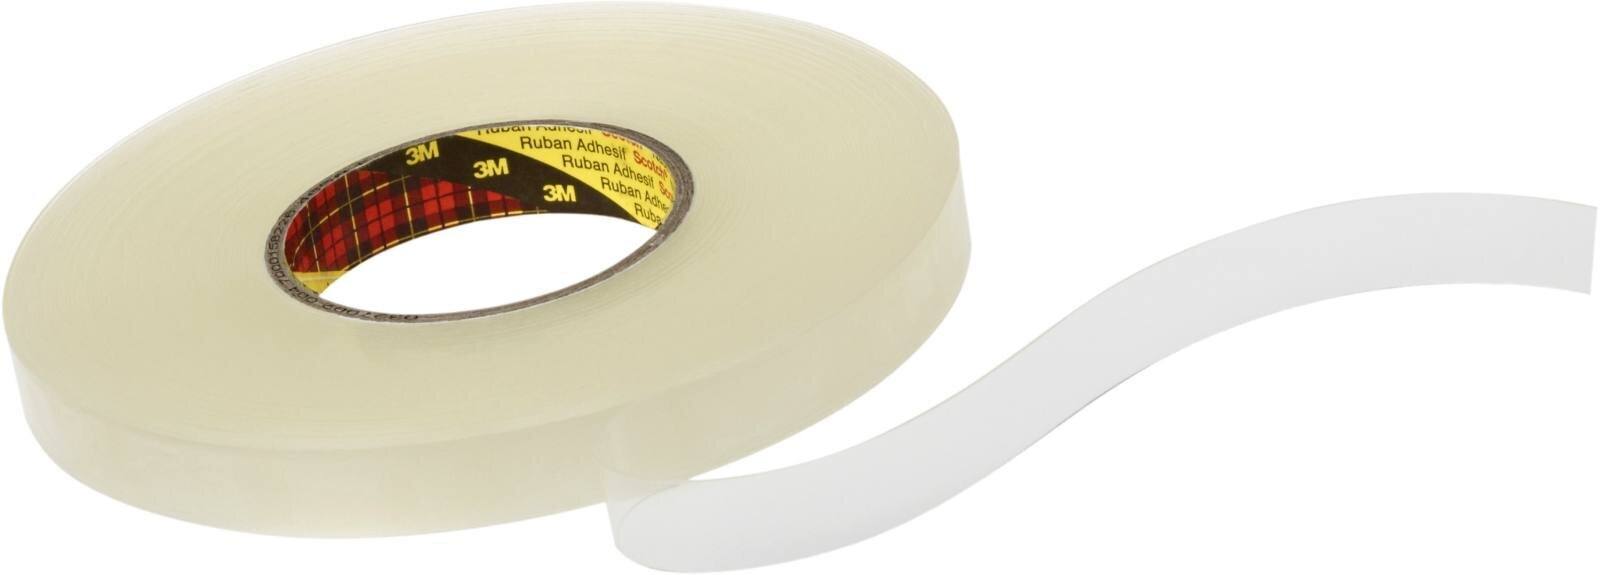 3M double-sided removable adhesive tape 4658F, transparent, 50 mm x 25 m, 0.8 mm